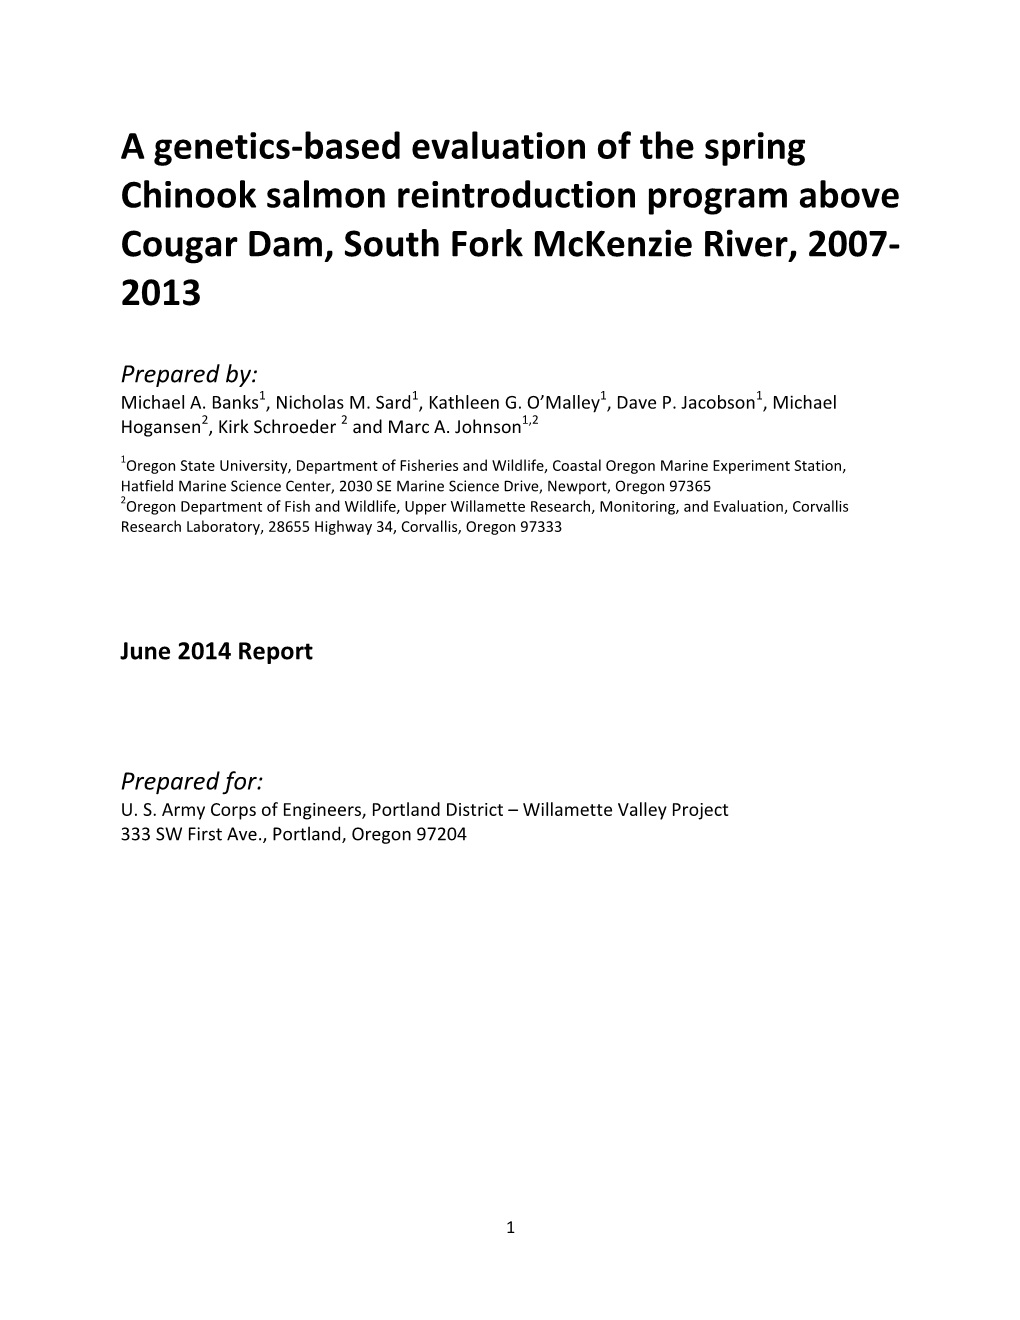 A Genetics-Based Evaluation of the Spring Chinook Salmon Reintroduction Program Above Cougar Dam, South Fork Mckenzie River, 2007- 2013